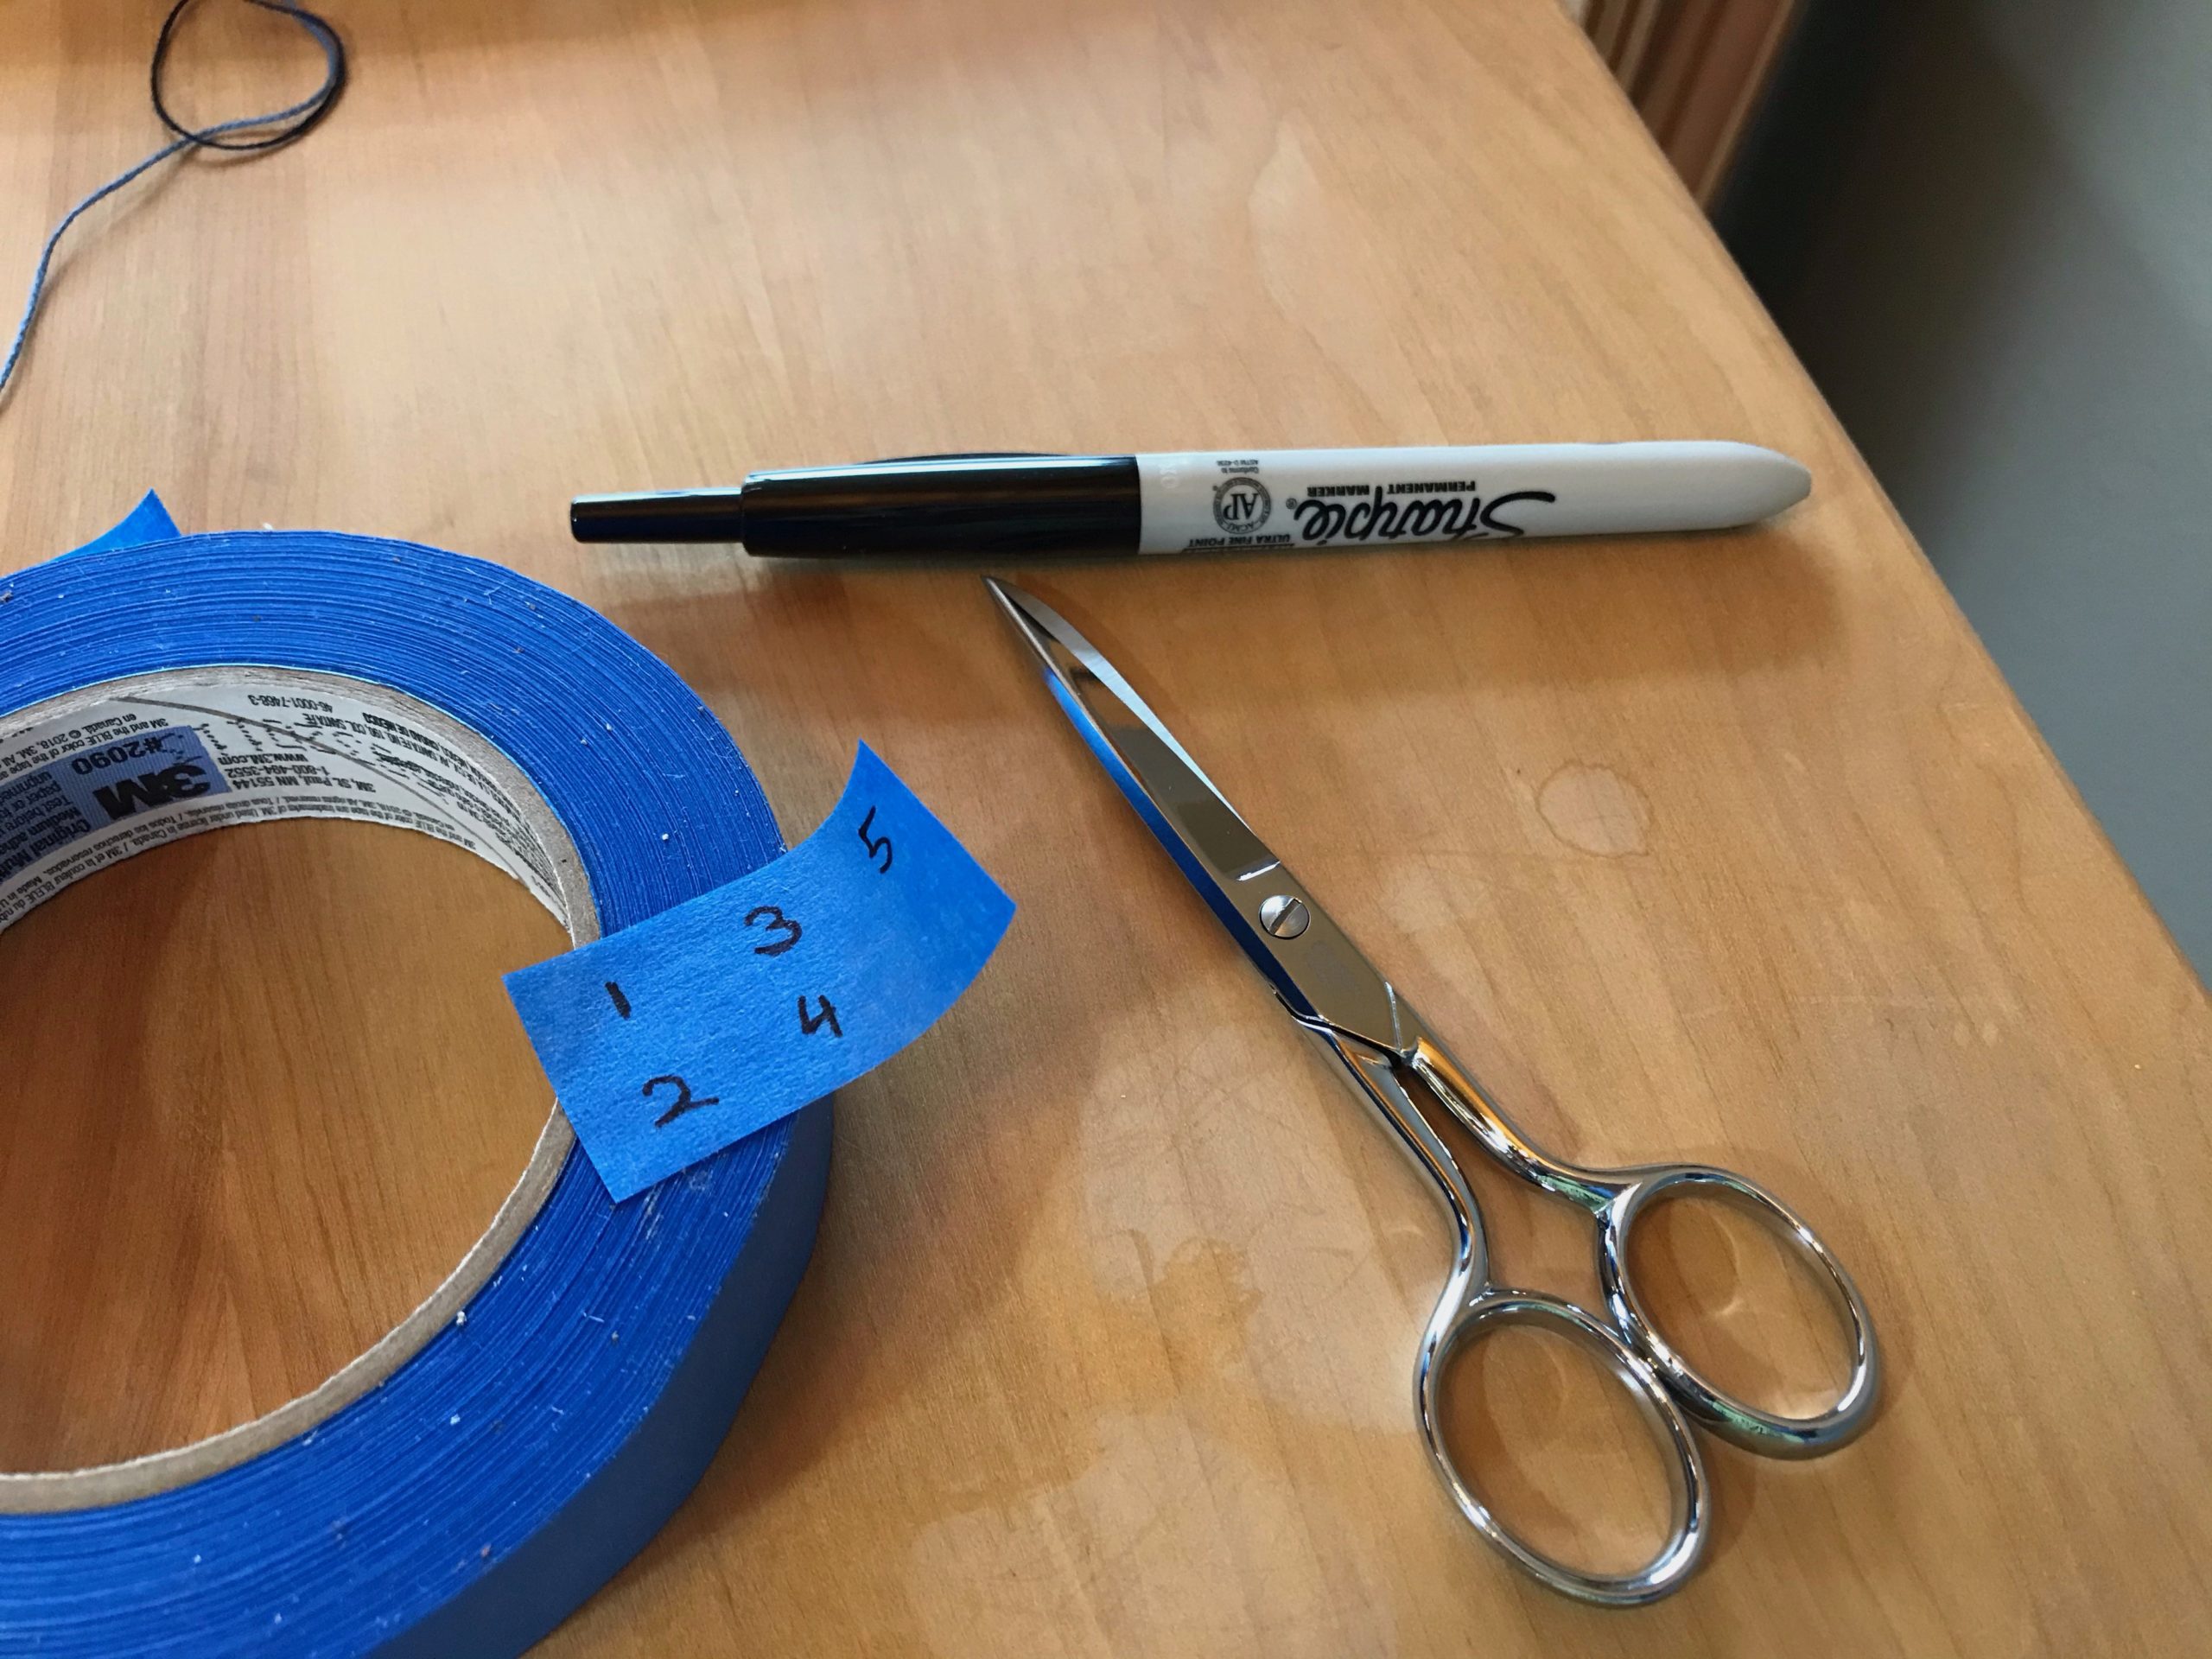 Make removable labels with blue painter's tape.